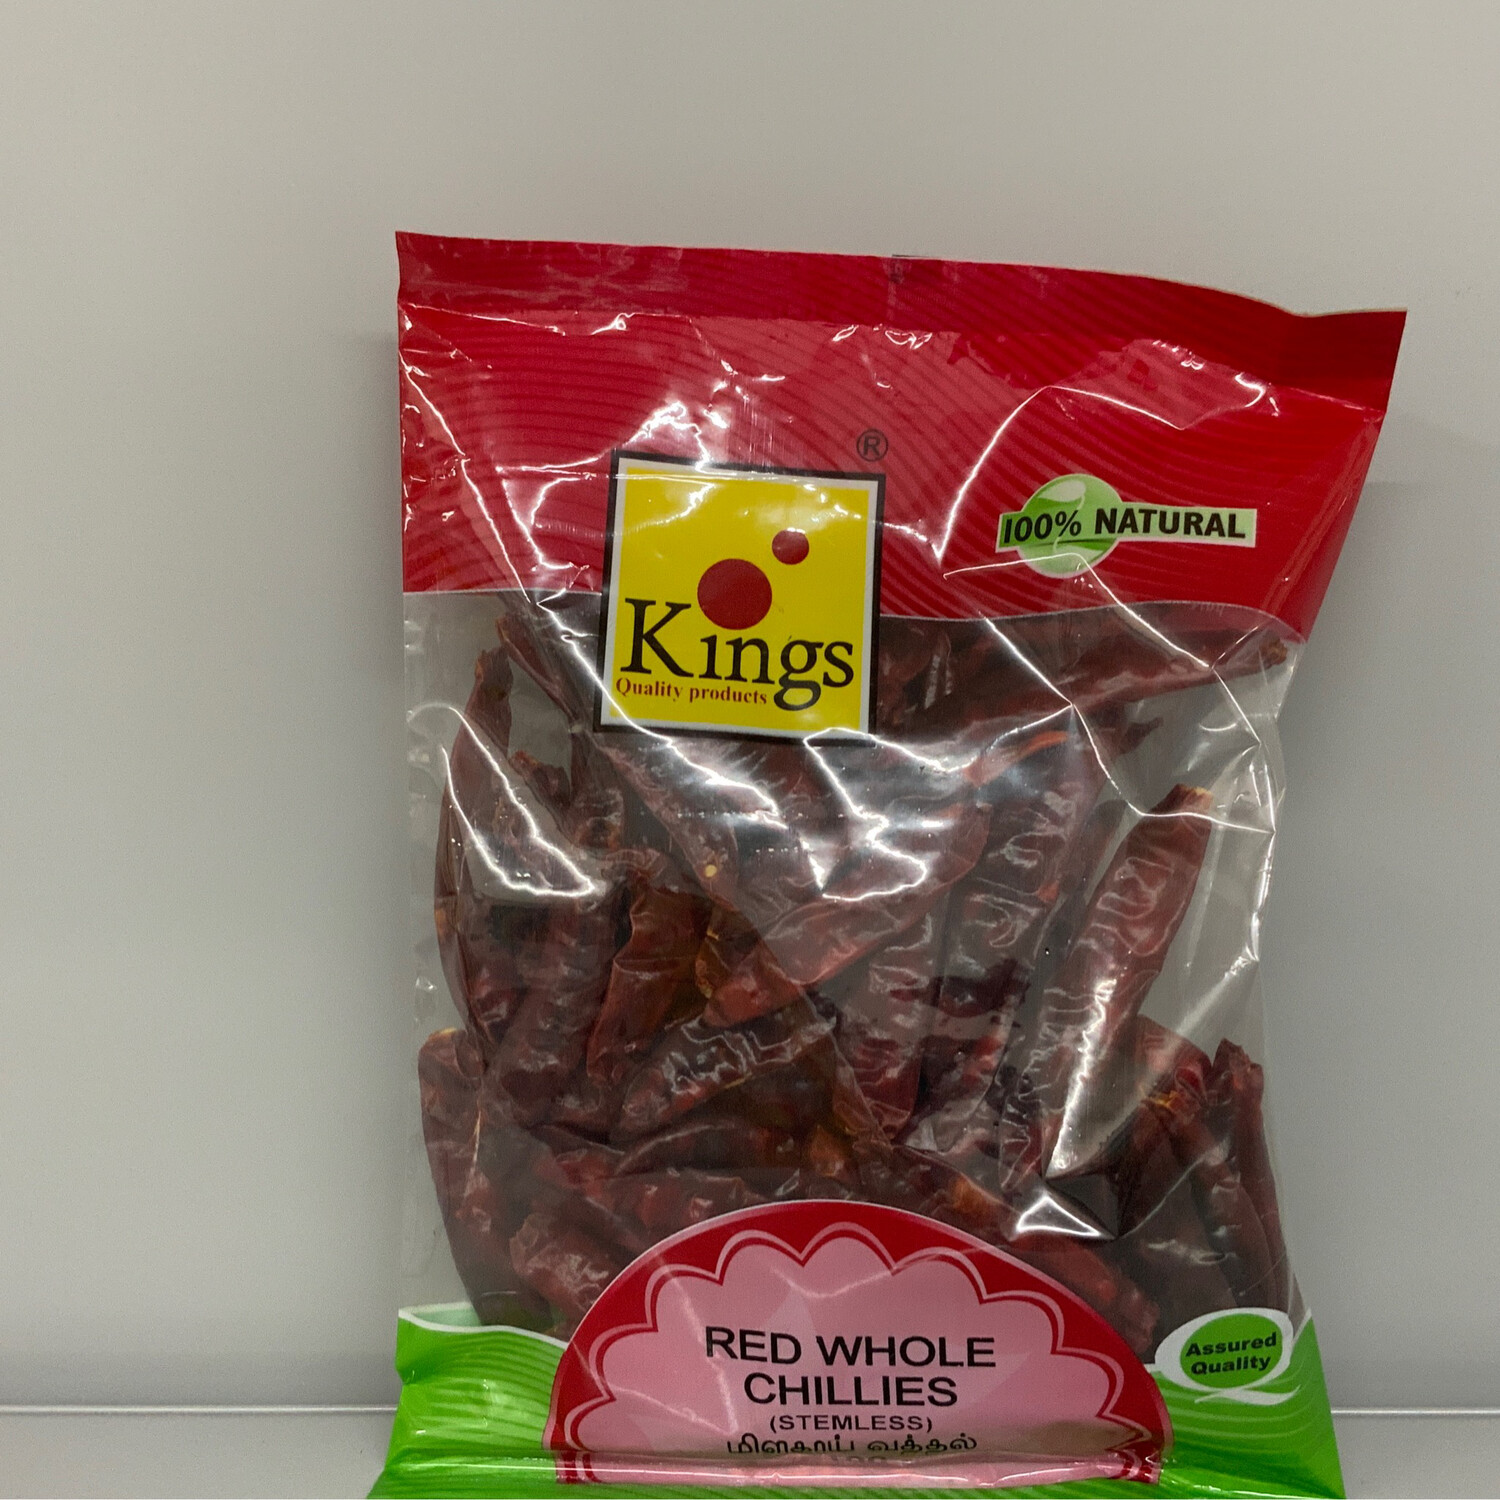 Kings Red whole Chillies 100g